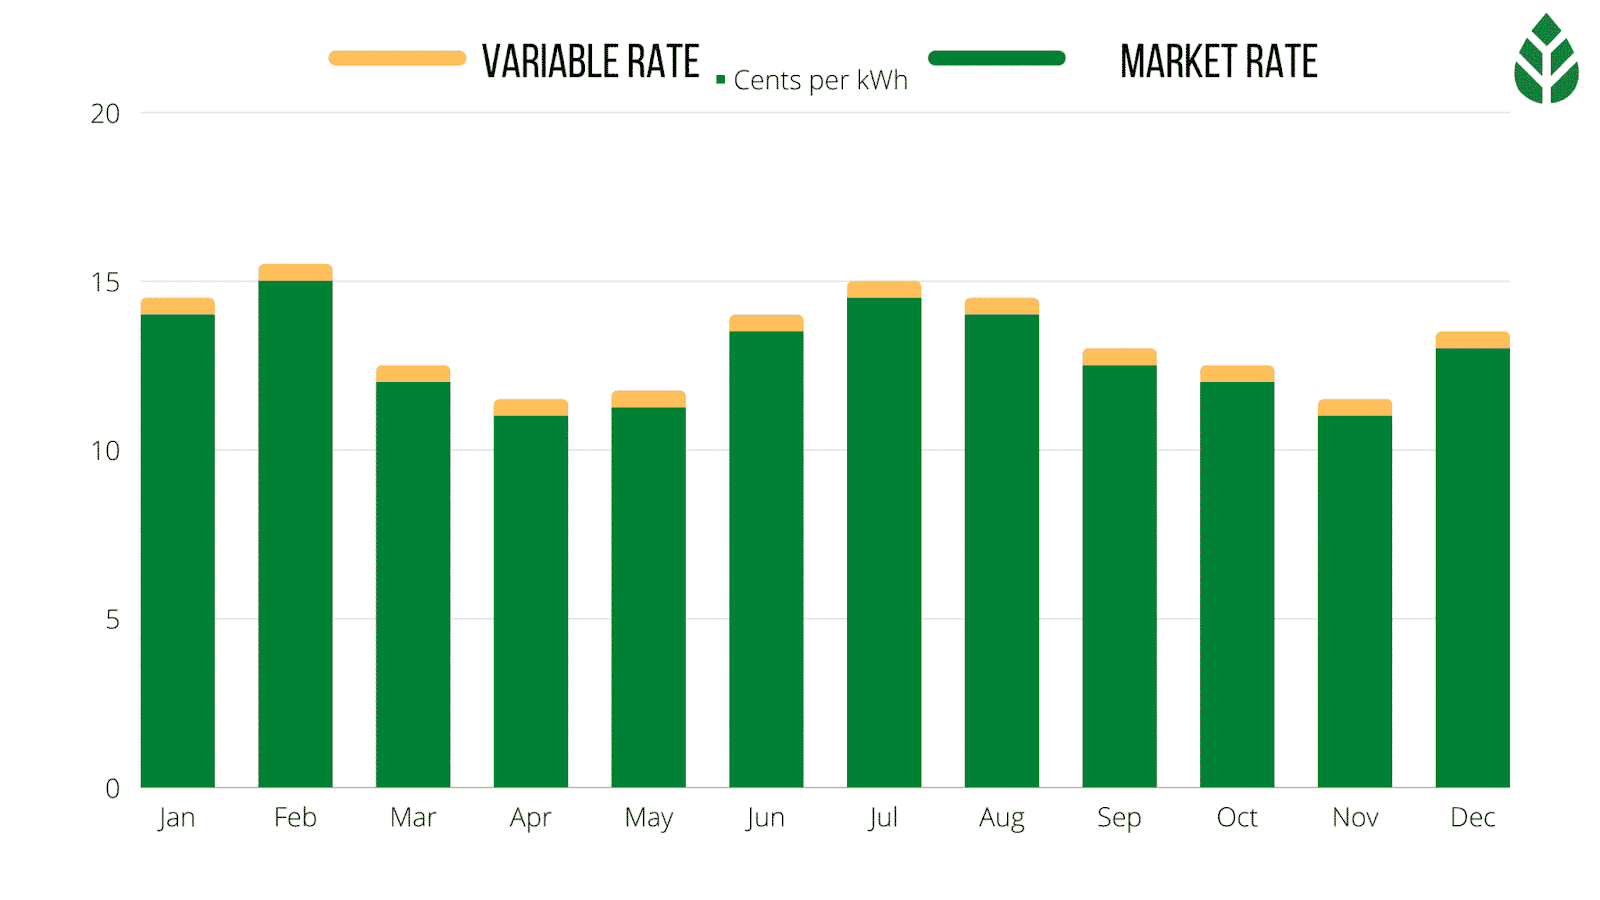 Variable Rate vs Market Rate Electricity Rates in Dallas by Month